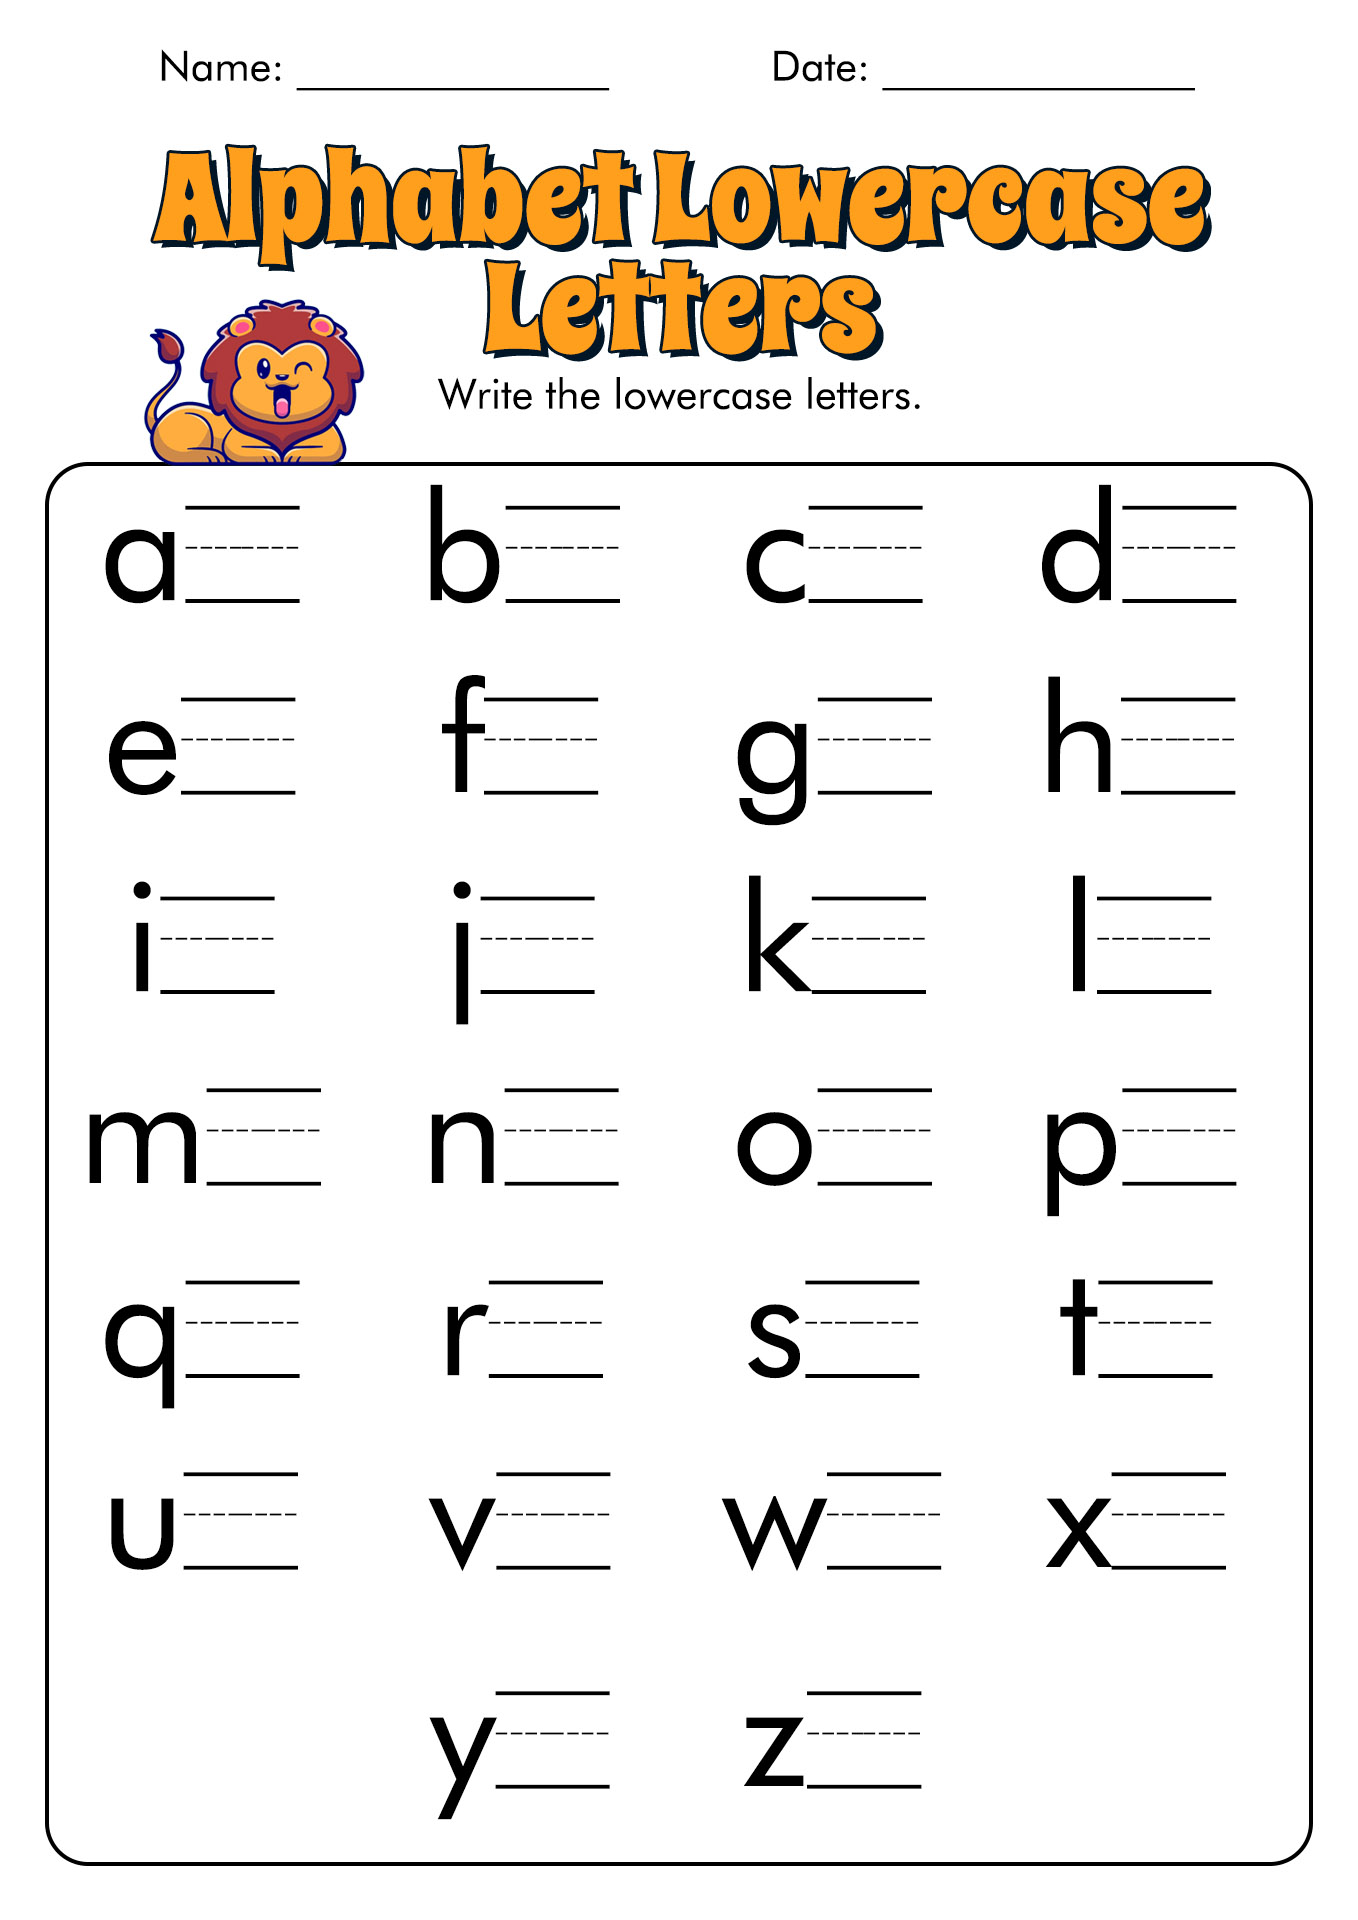 Practice Writing Lowercase Letters